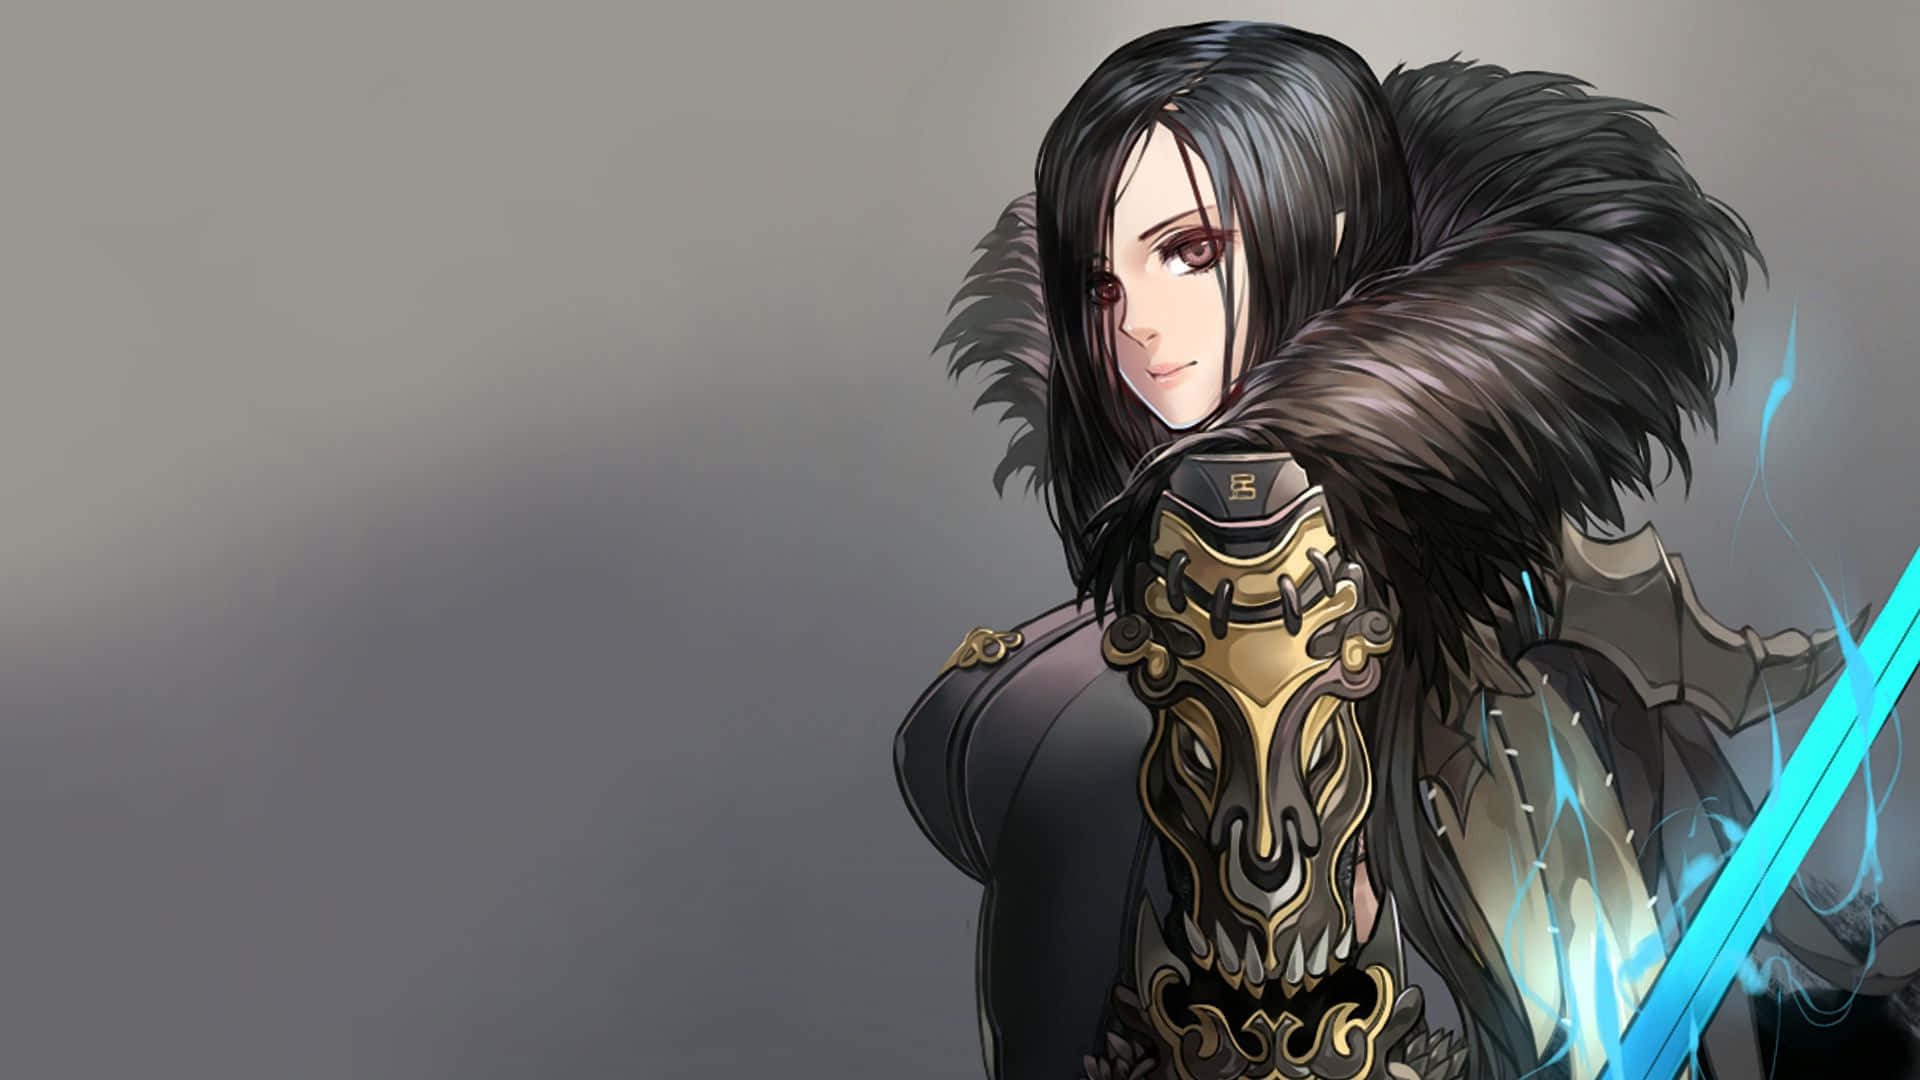 A Female Character In A Fantasy Costume Holding A Sword Wallpaper